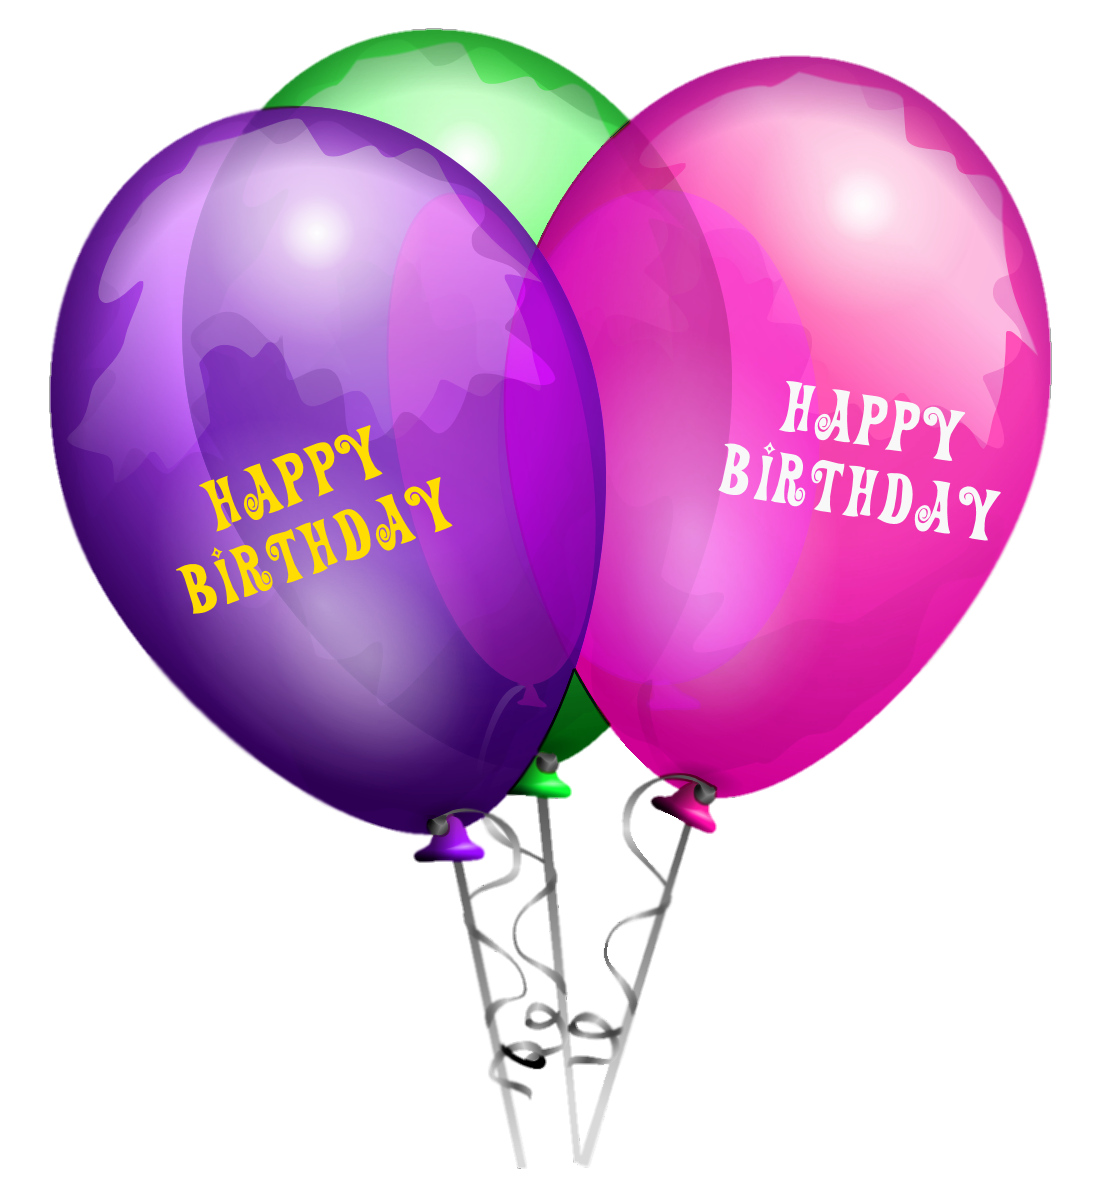 Birthday Balloons Png High Quality Images For Your Celebration The Best Porn Website